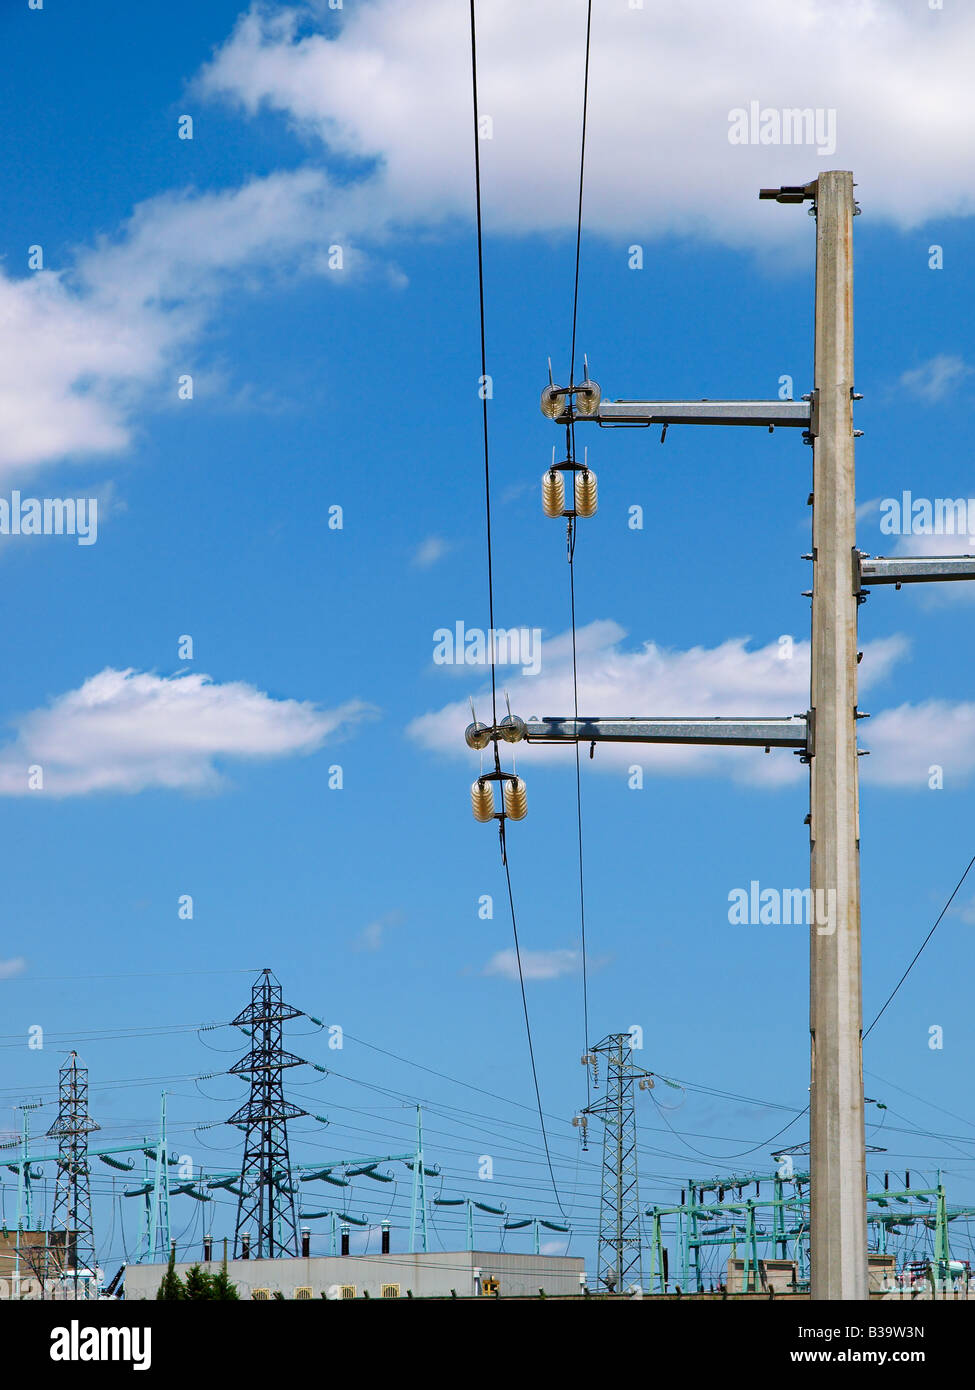 Electric power transmission line. Stock Photo